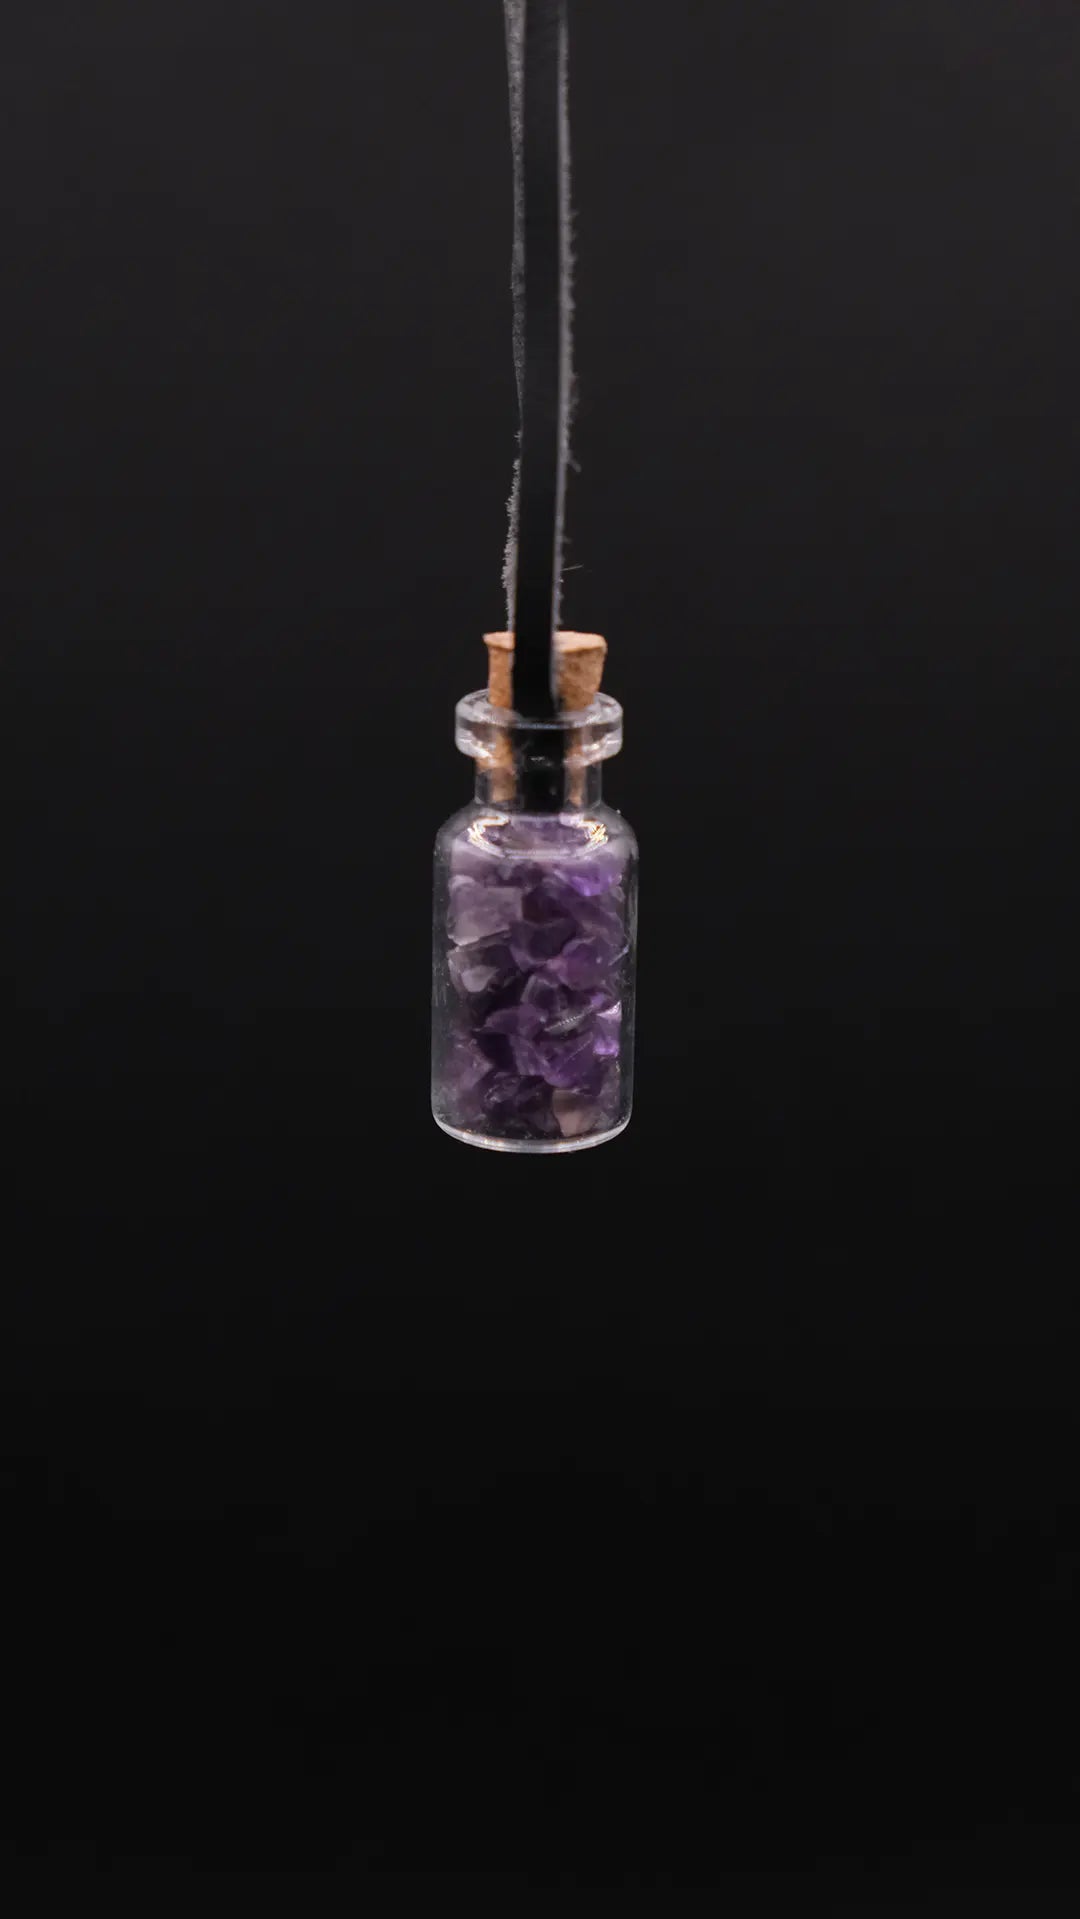 pendant made with a little glass bottle filled with amethyst shards over a black background